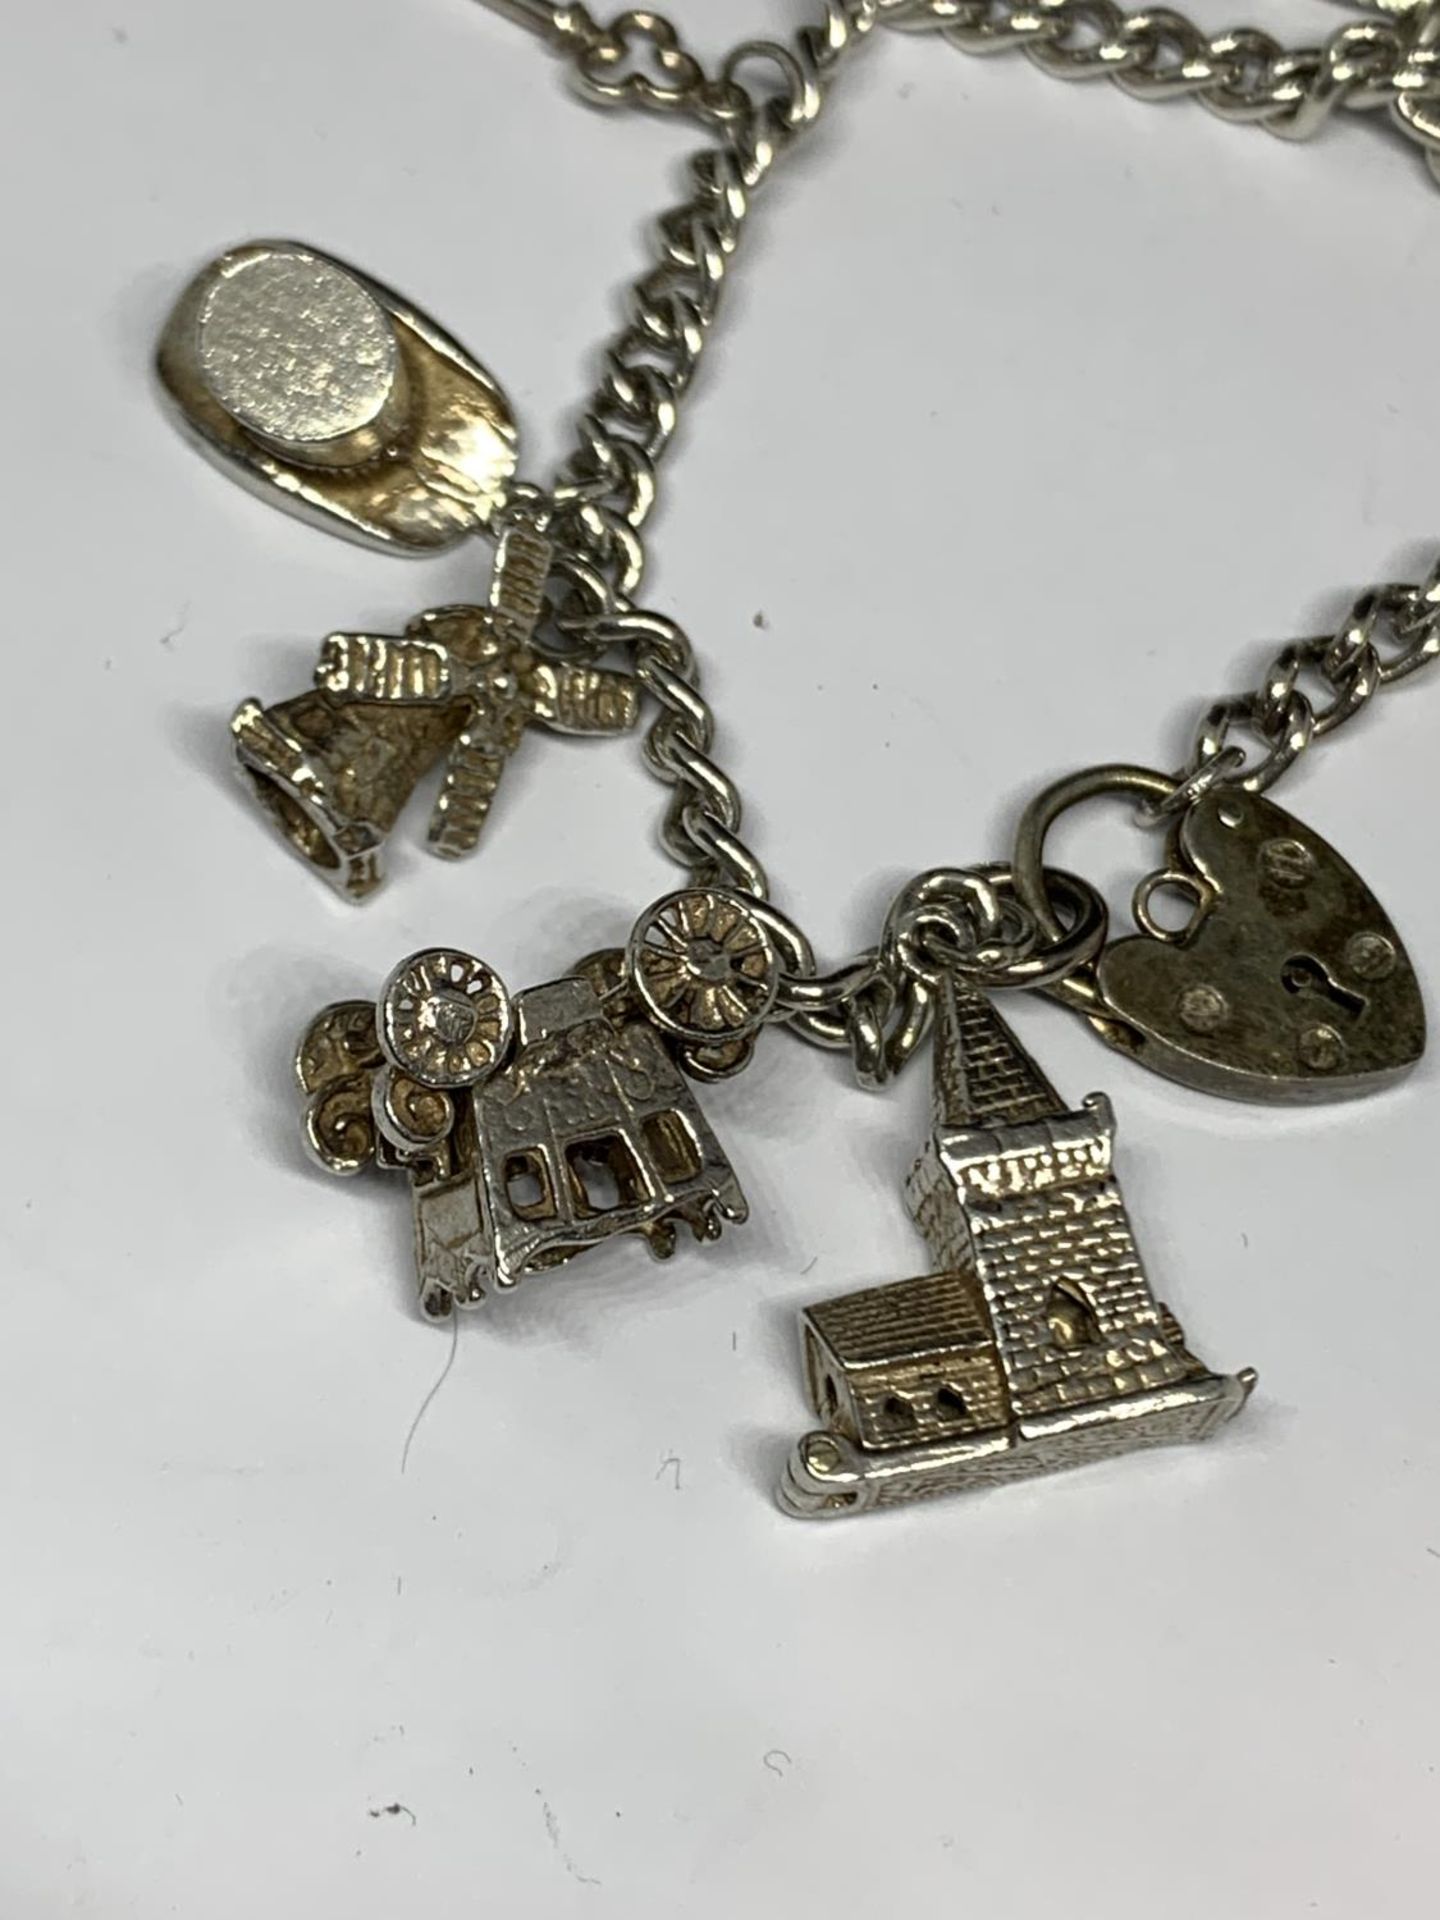 A SILVER CHARM BRACELET WITH NINE CHARMS AND A HEART PADLOCK - Image 2 of 4